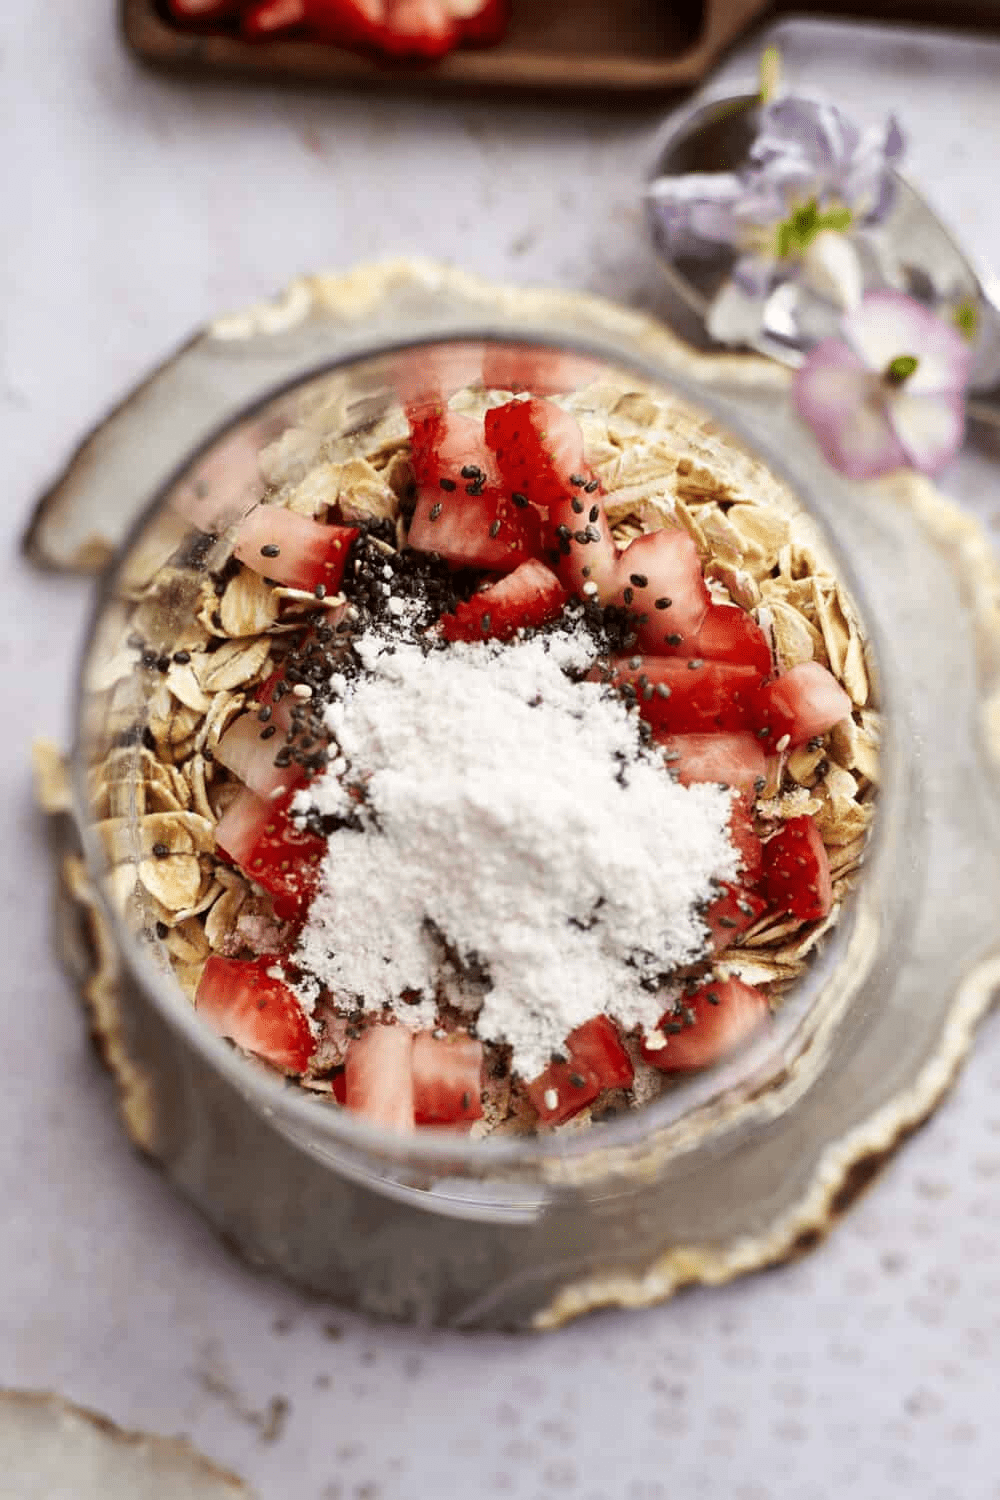 oats and strawberries topped with chia seeds and sweetener